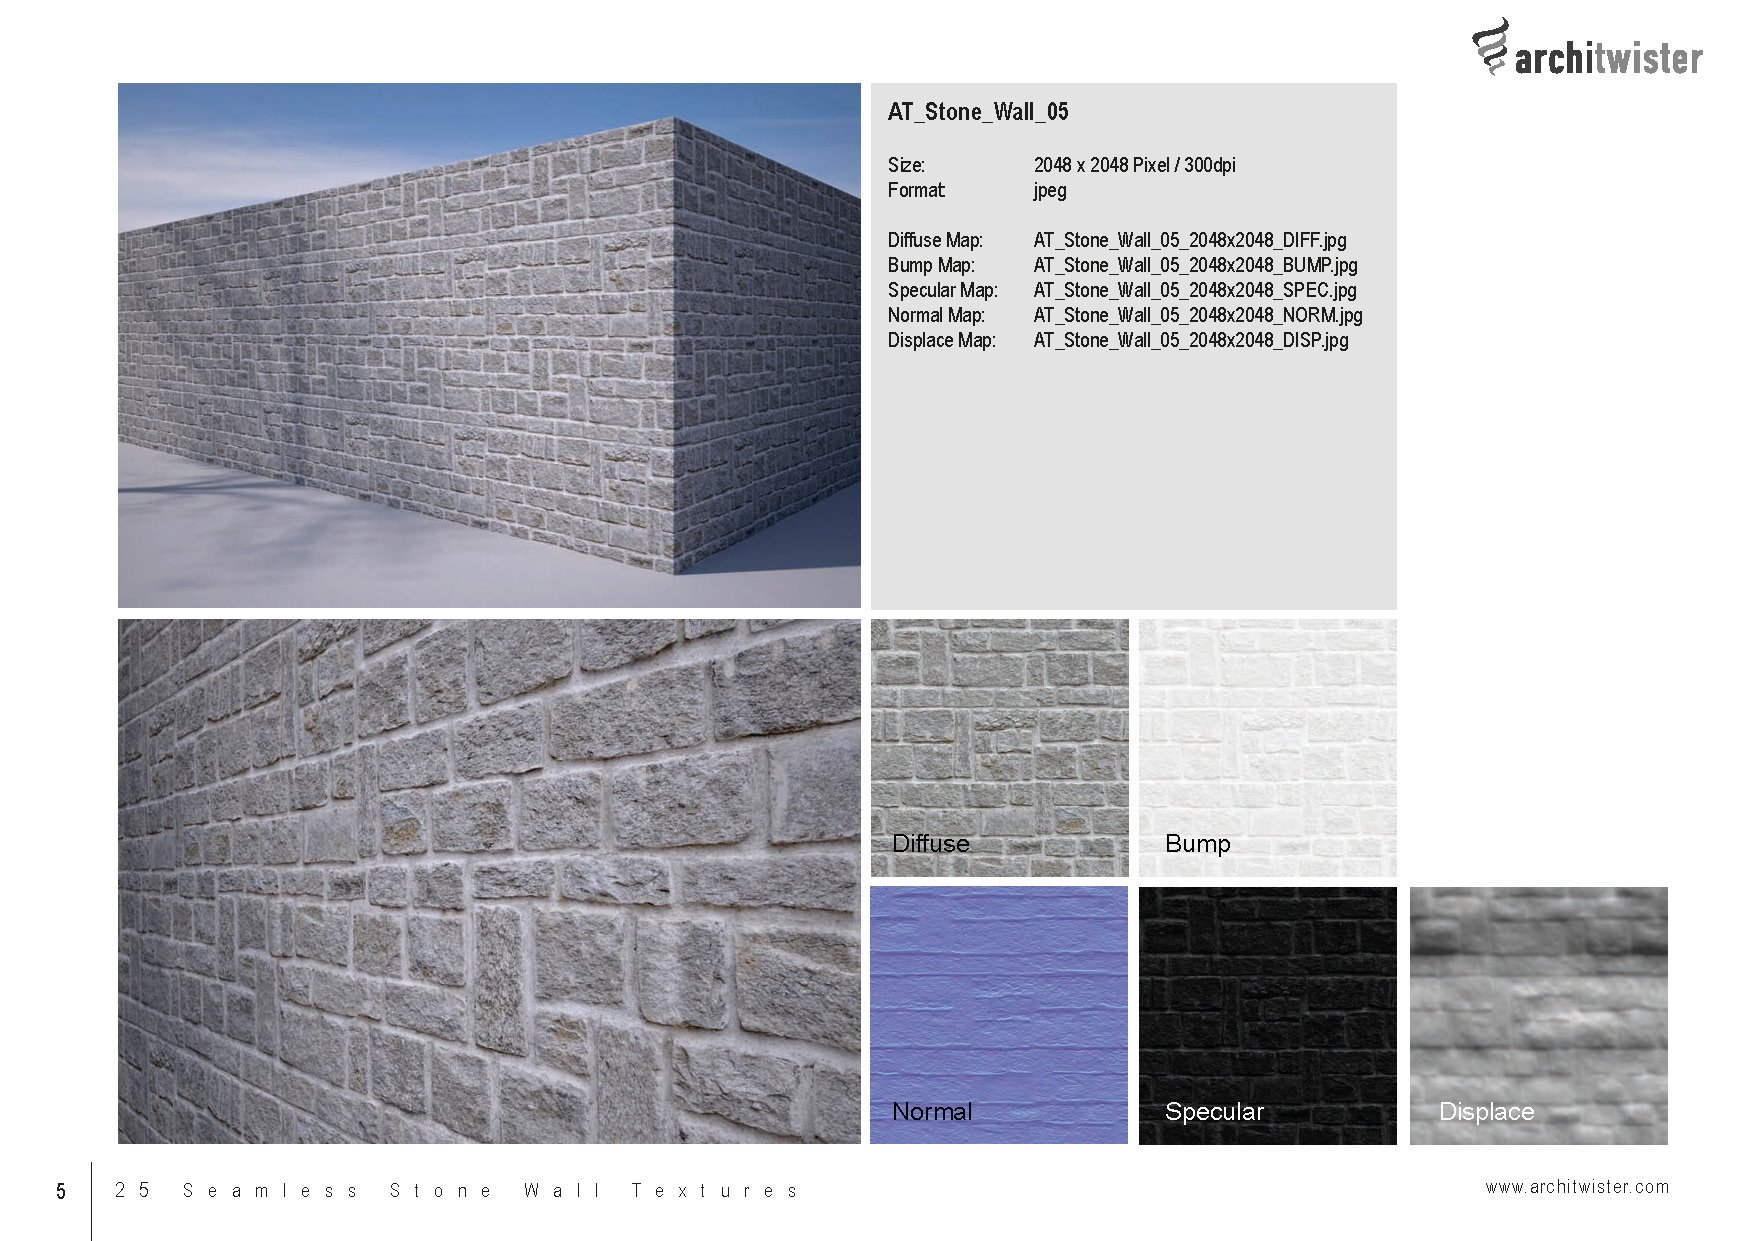 at stone wall textures catalog 01 seite 06 330